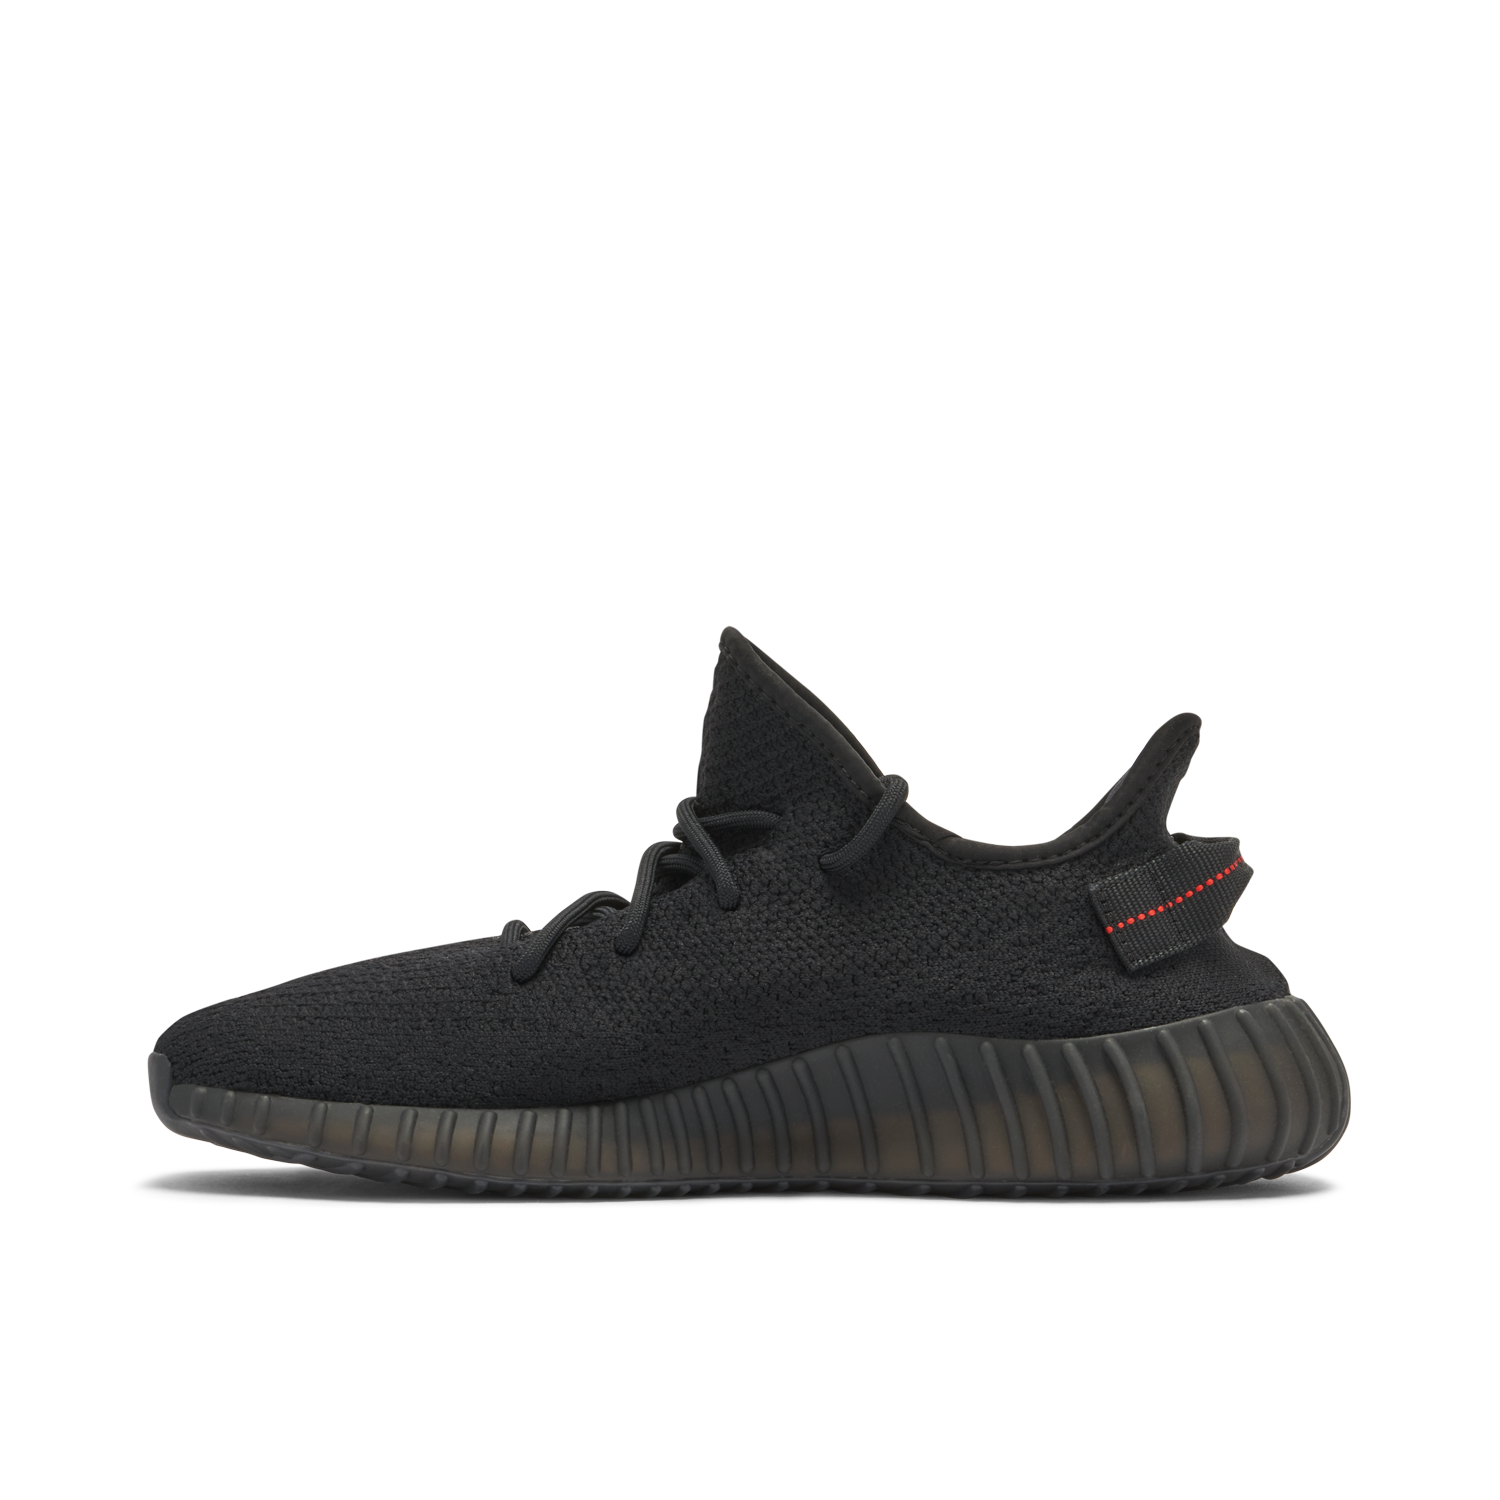 yeezy bred size 9